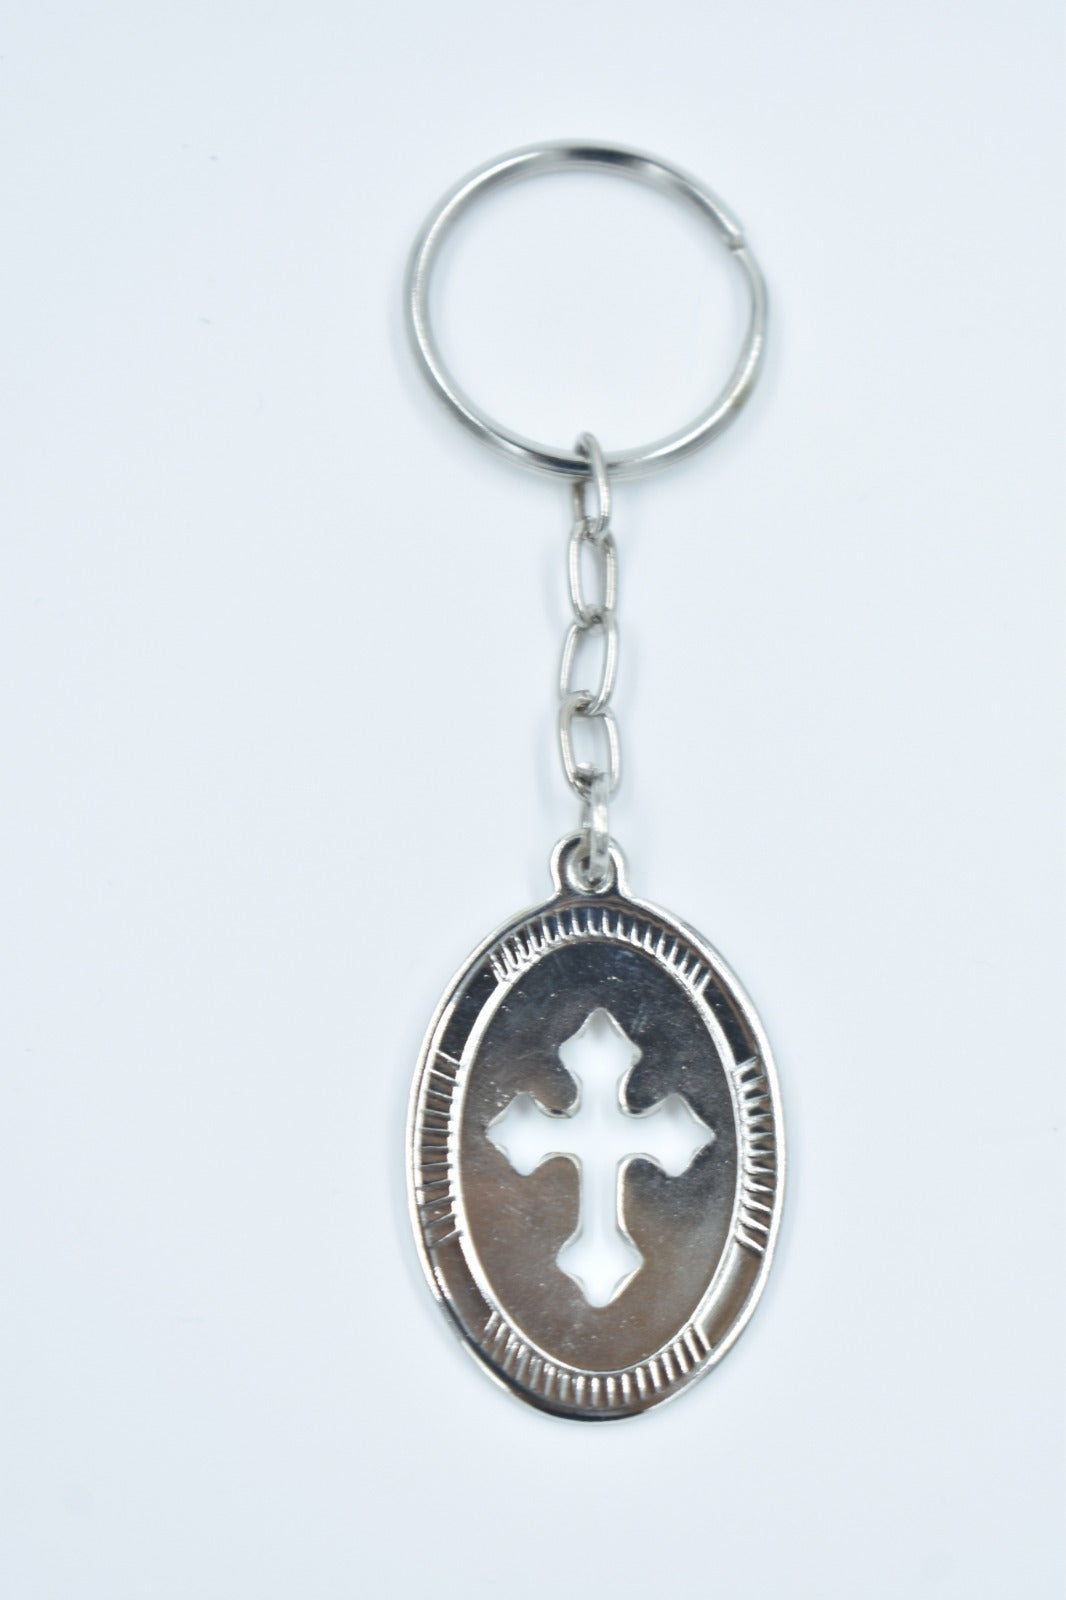 Oval Silver Key Chain with Inspirational Words | Engraved Keychain